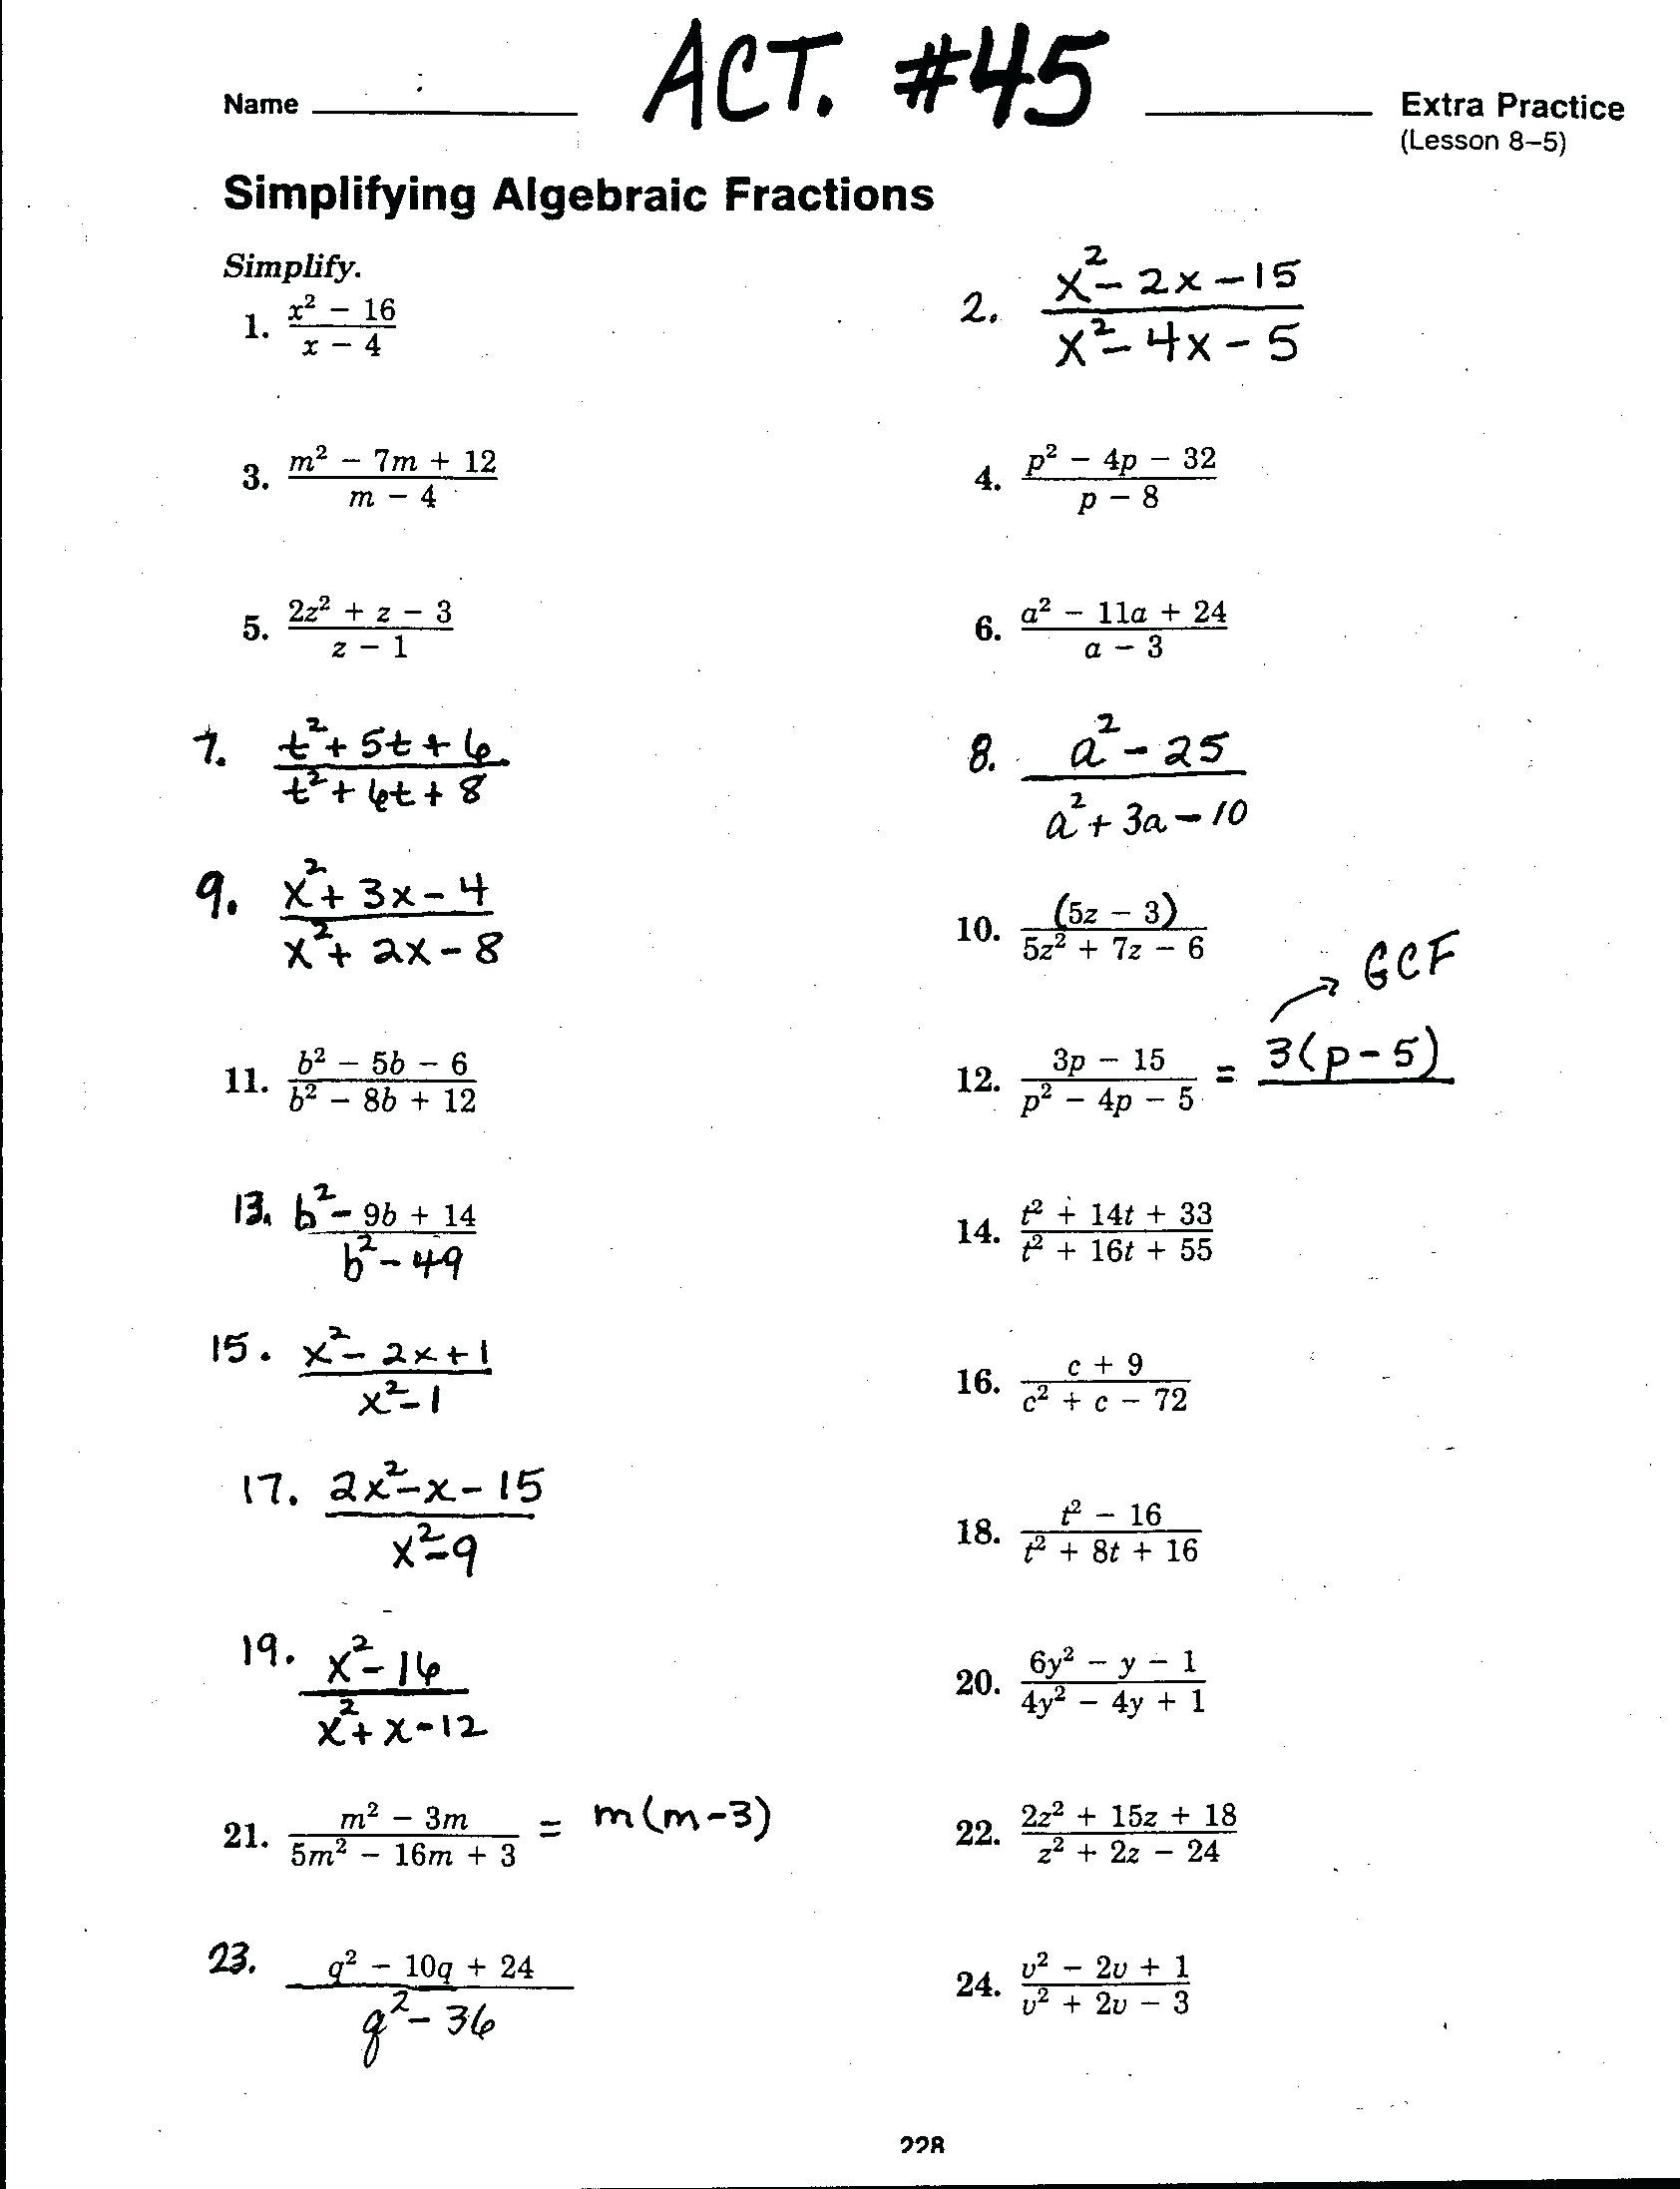 Simplifying Rational Expressions Worksheet Addition Rational Expressions Worksheet